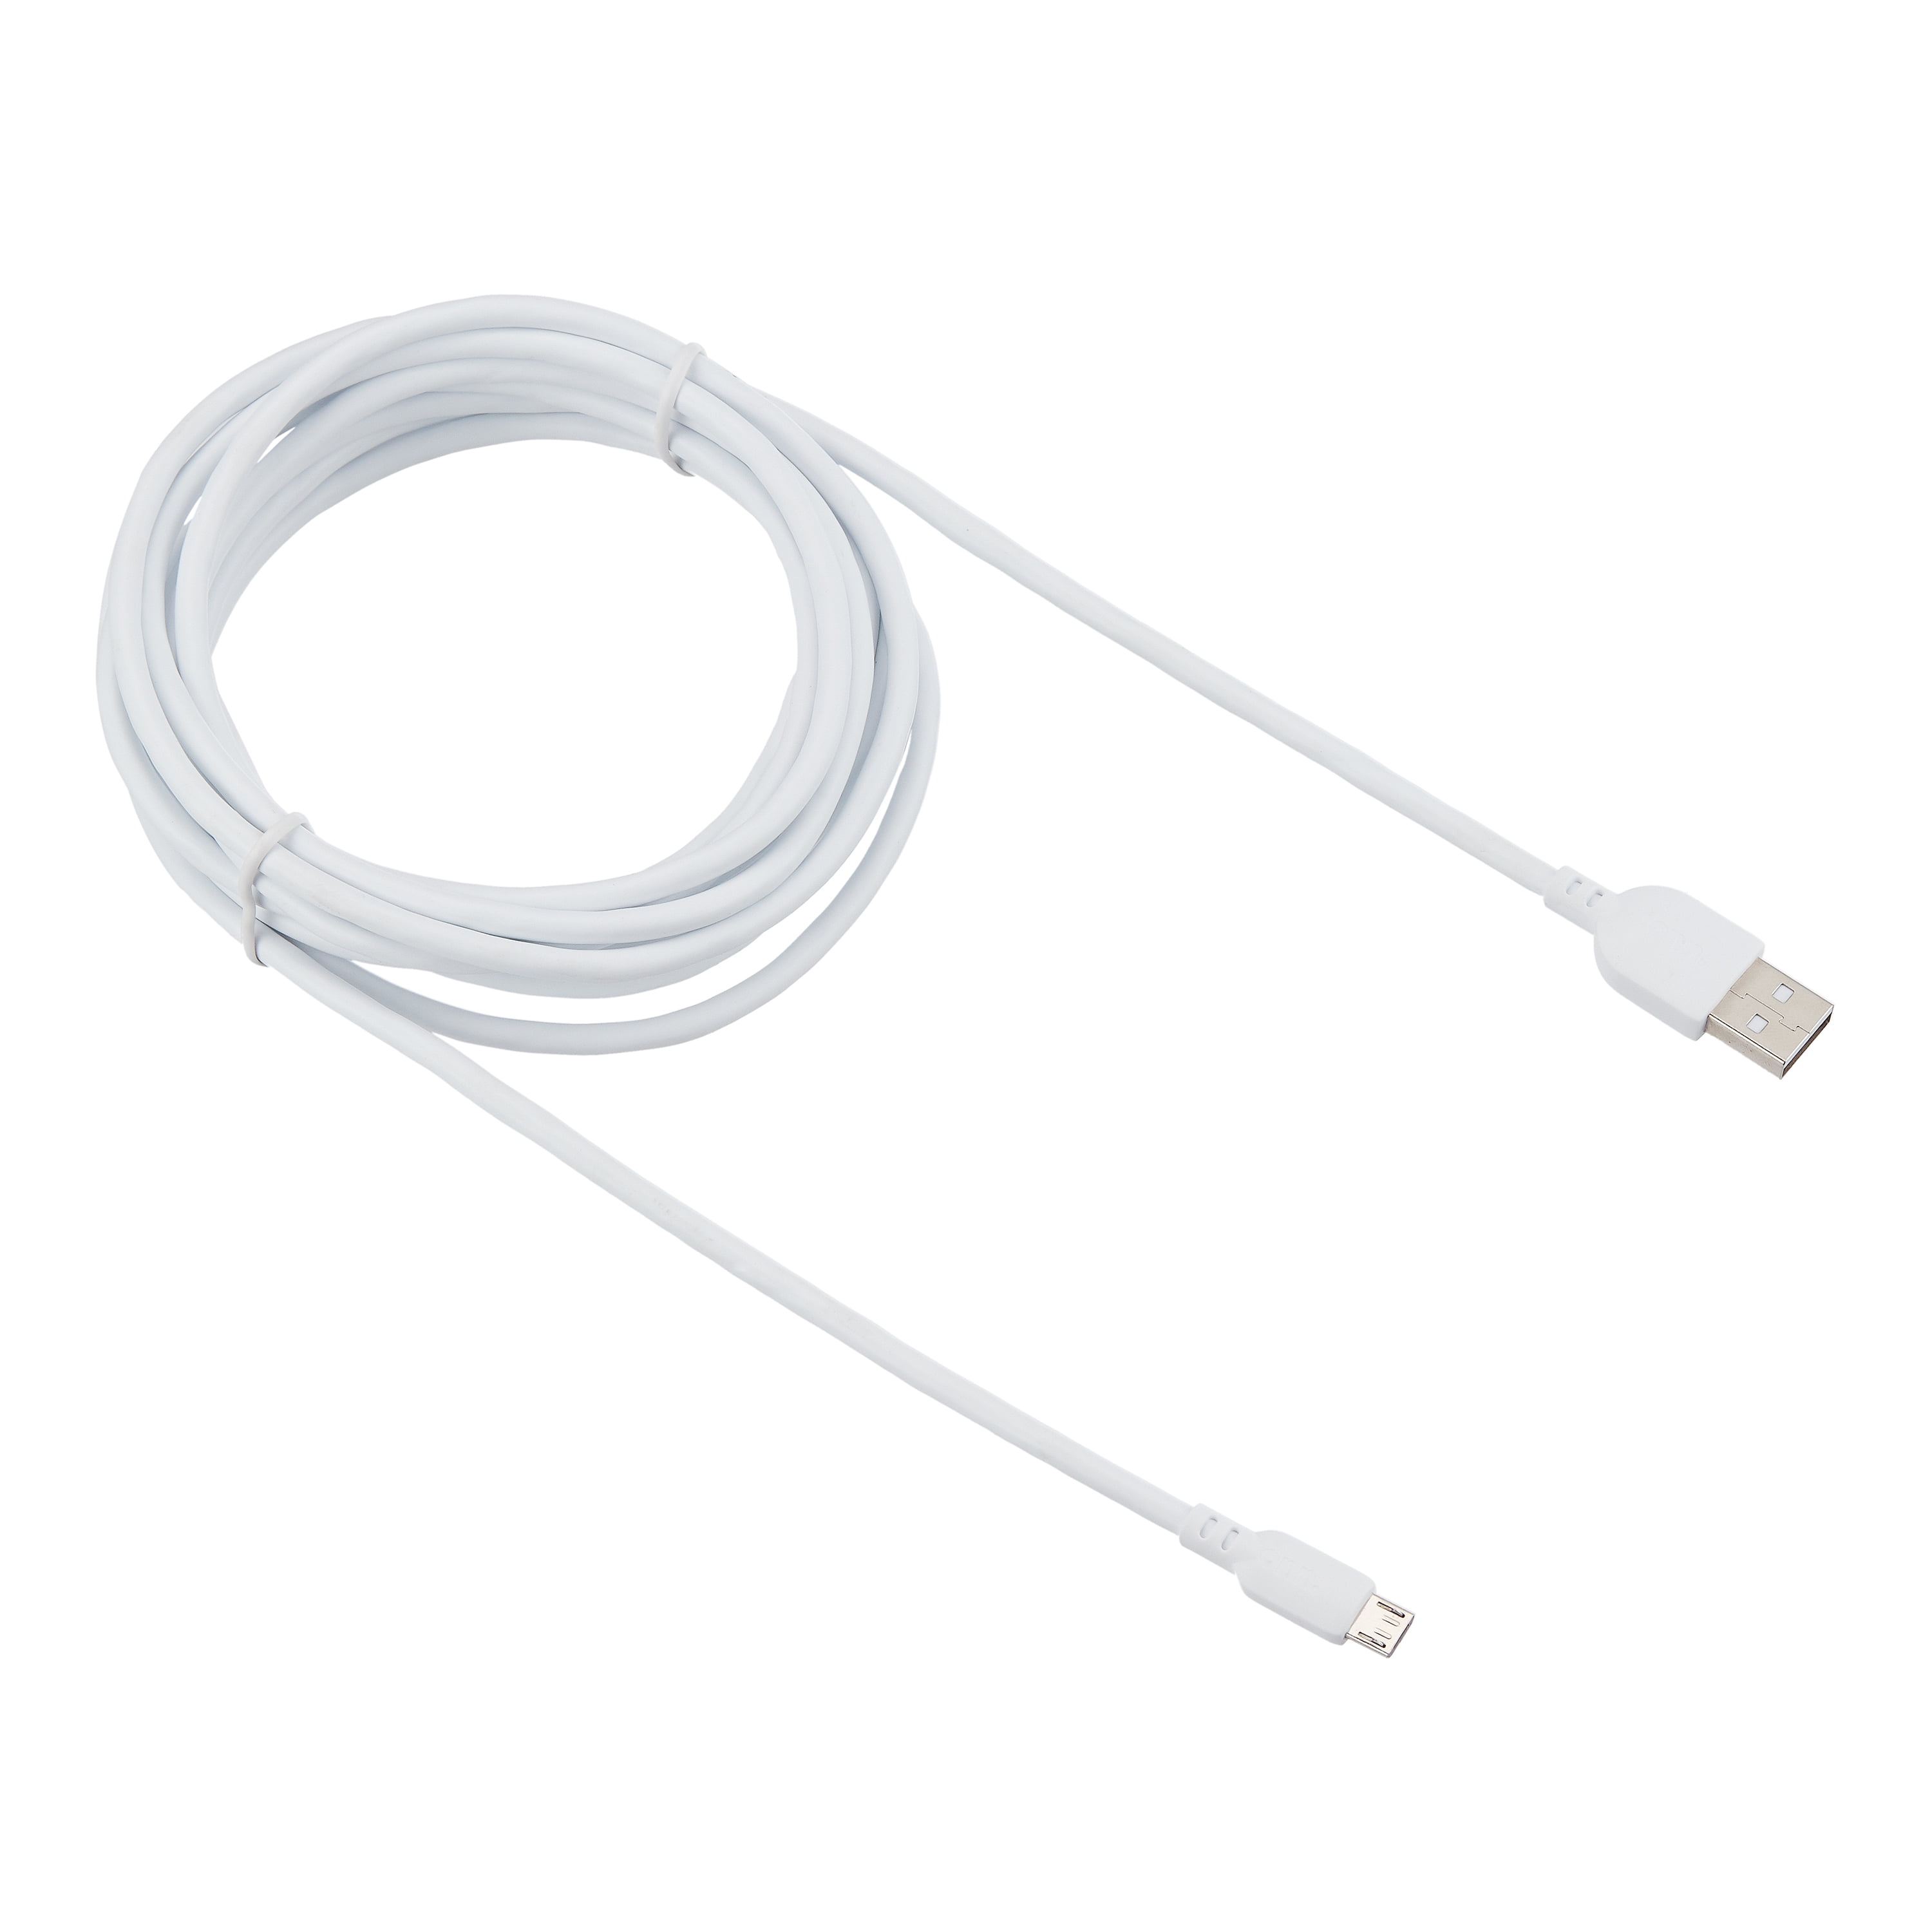 onn. Micro-USB to USB Cable, 10 ft, White 